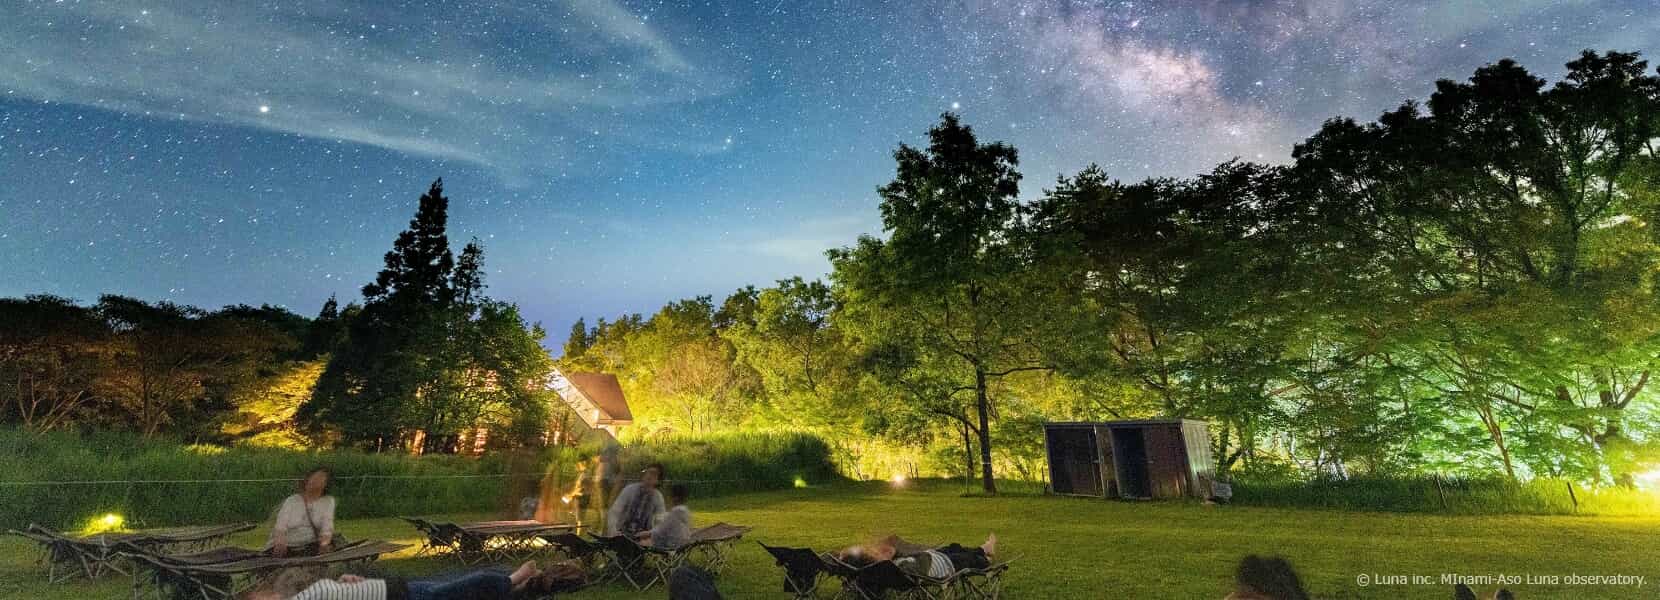 Retreat Under The Stars in Japan